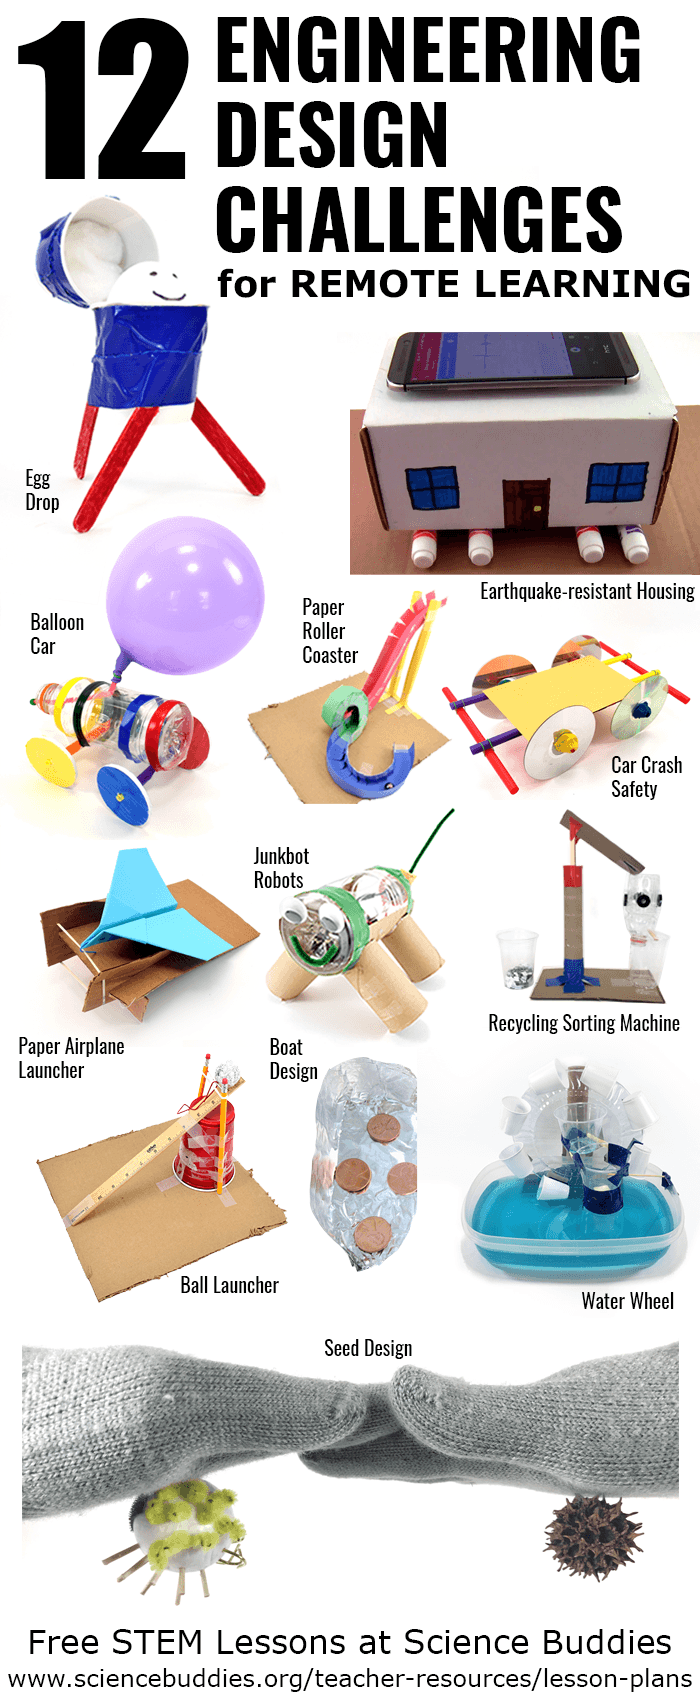 Images of 12 student Engineering Design Challenges Perfect for Remote Learning (described and linked below)